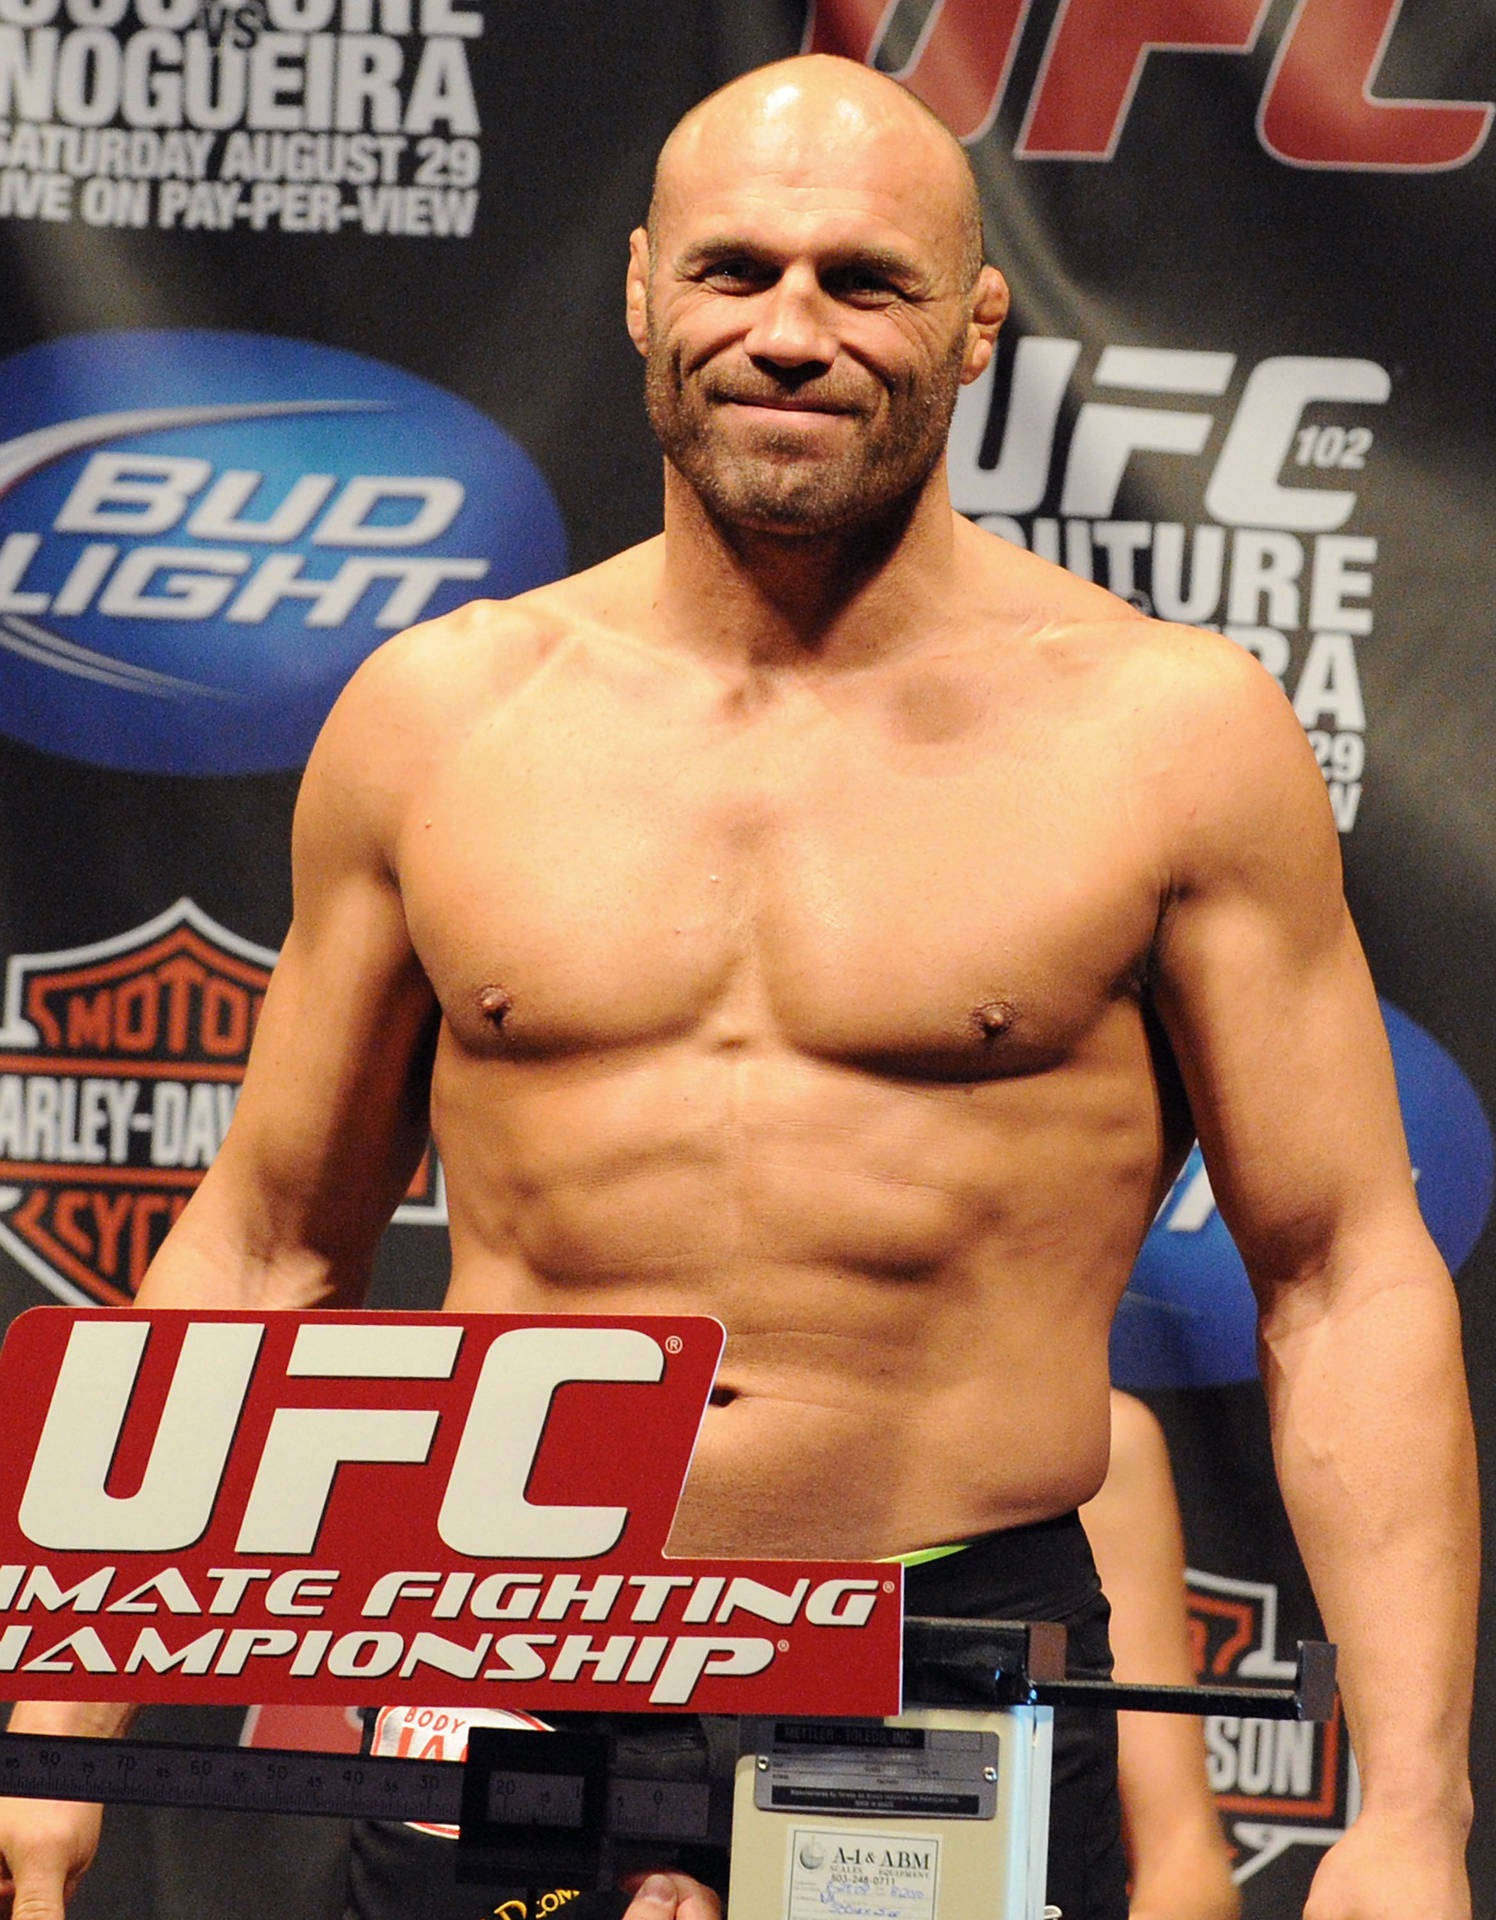 Bare-chested Randy Couture Wallpaper